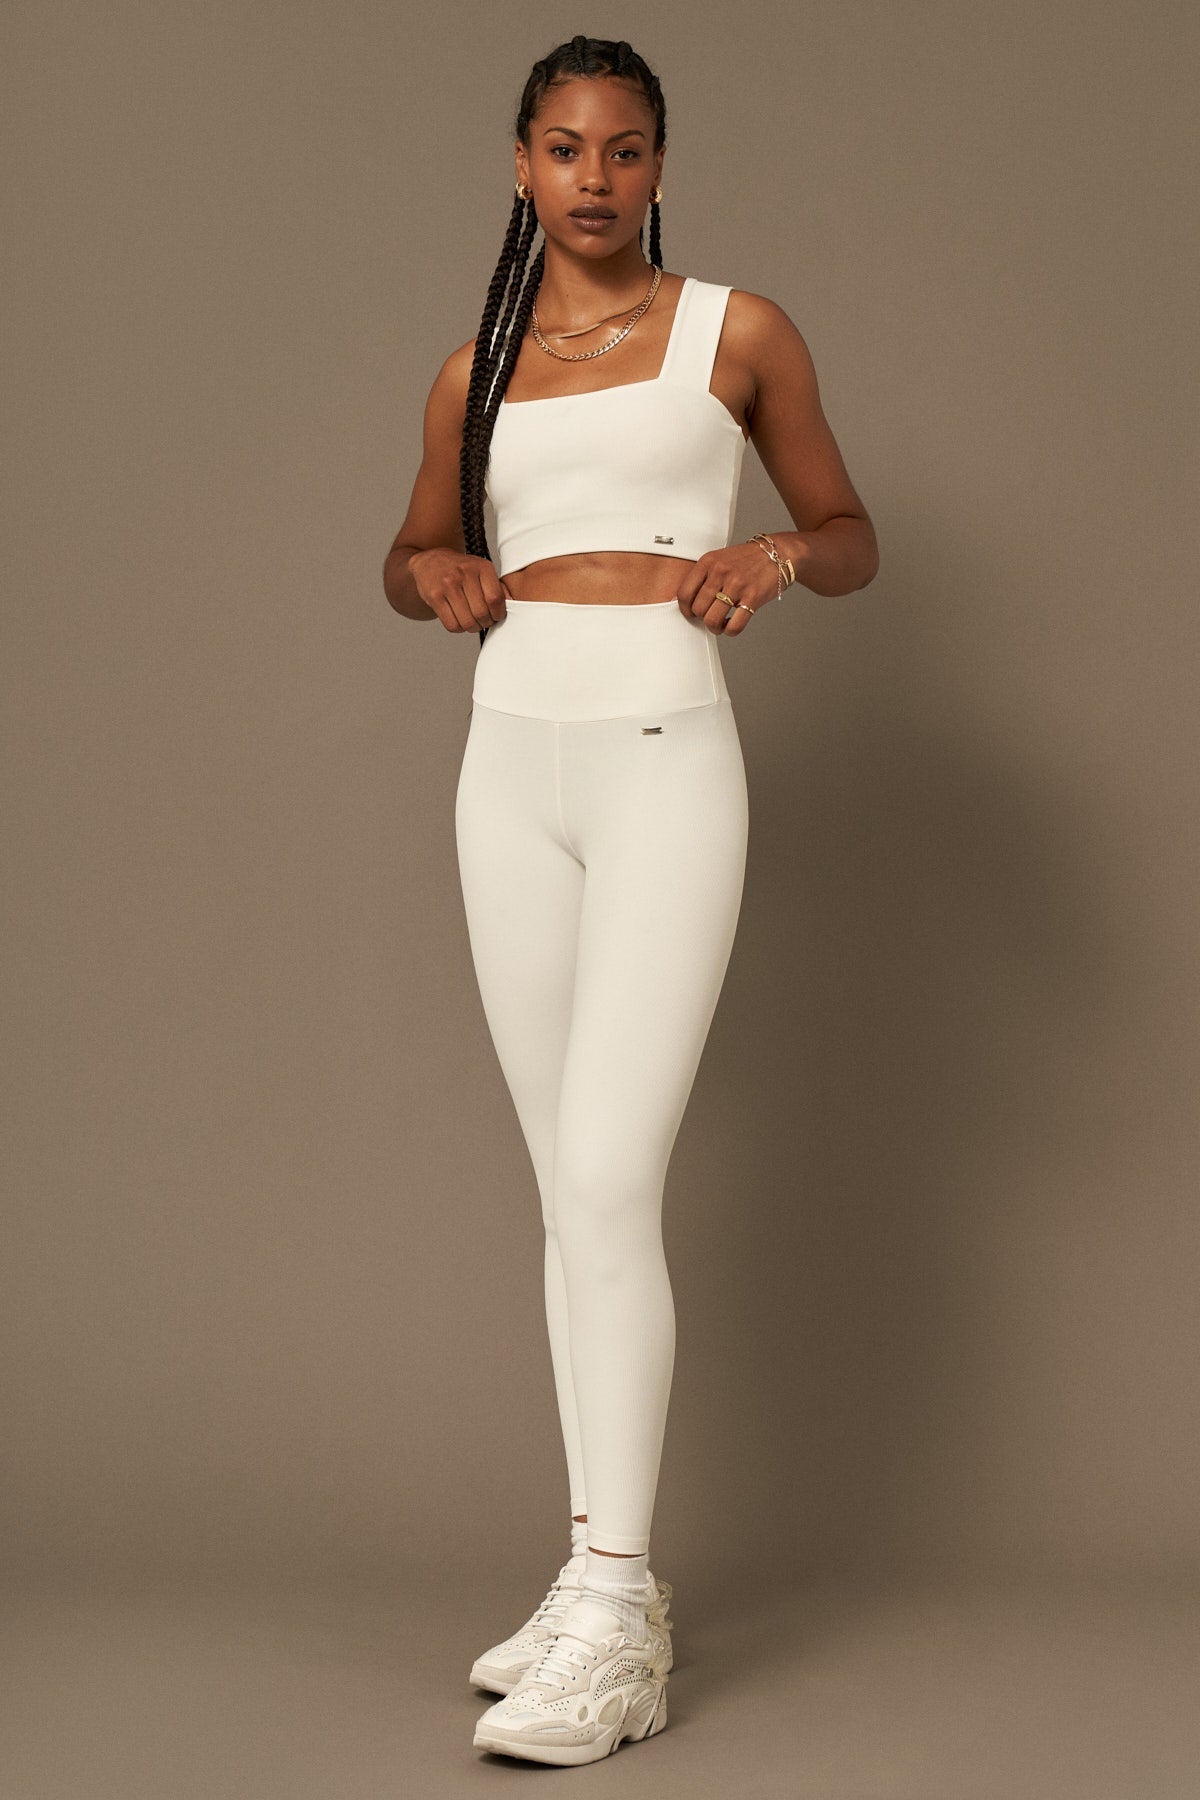 Silver Lake Bra in Pearl White-Bras-Shop Clothing Sustainable Recycled Yoga Leggings Women's On-line Barcelona Believe Athletics Sustainable Recycled Yoga Clothes